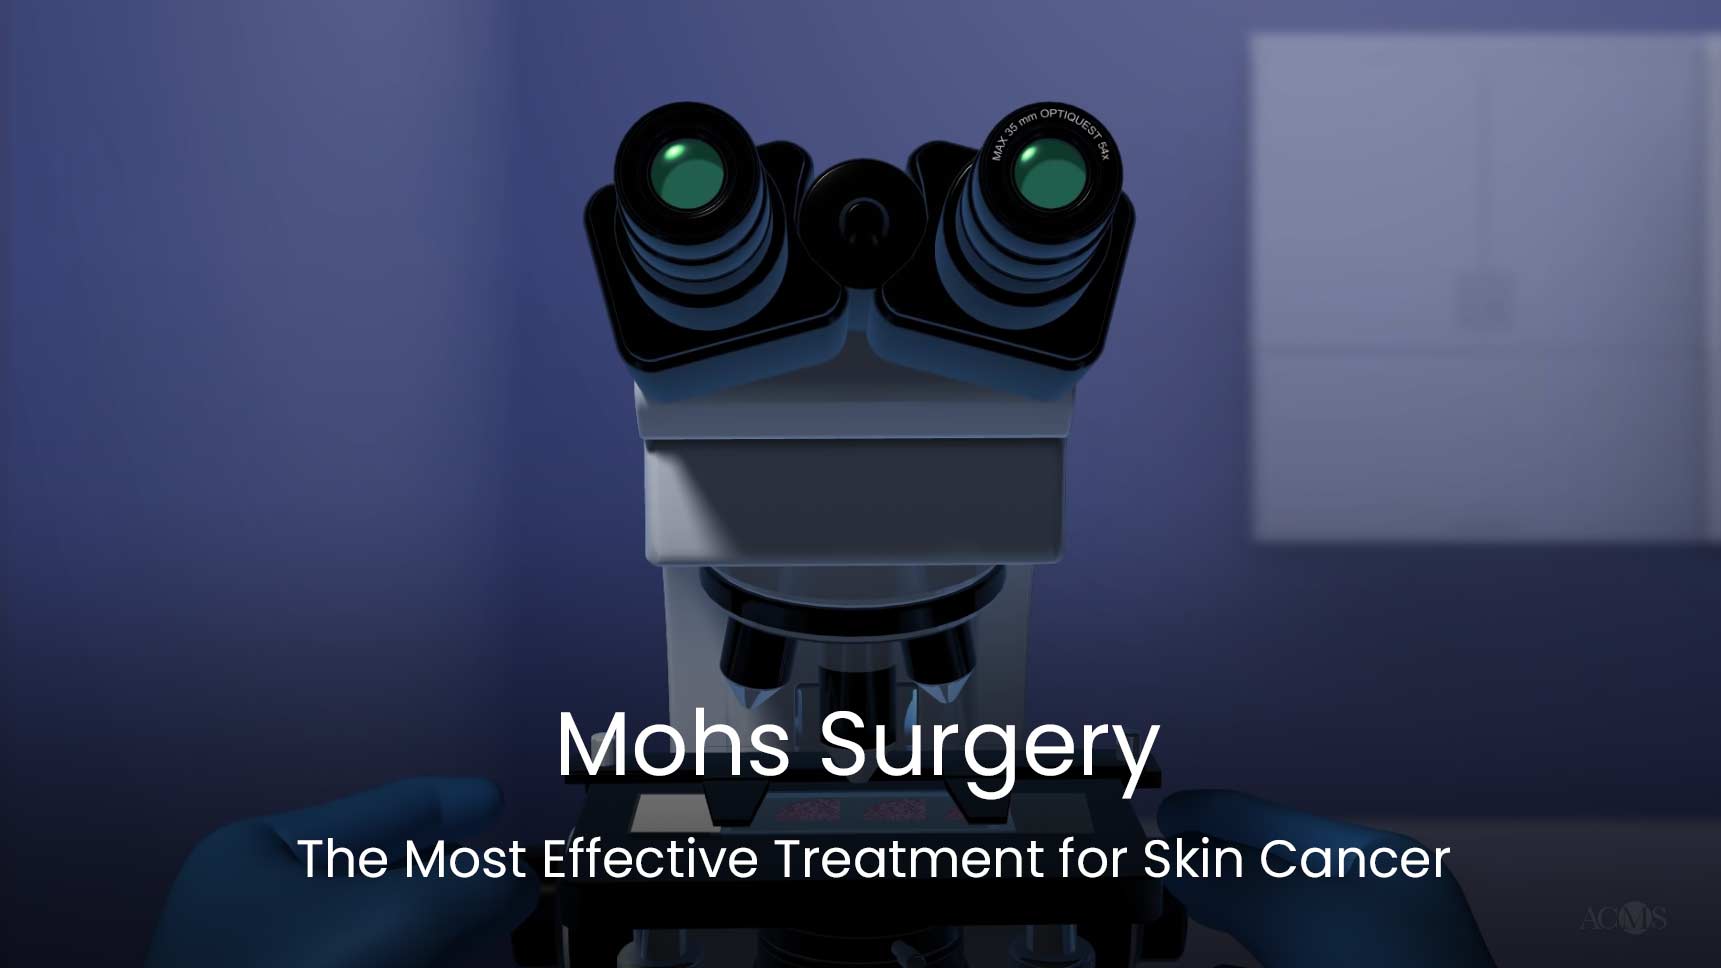 Mohs Surgery The Most Effective Treatment for Skin Cancer